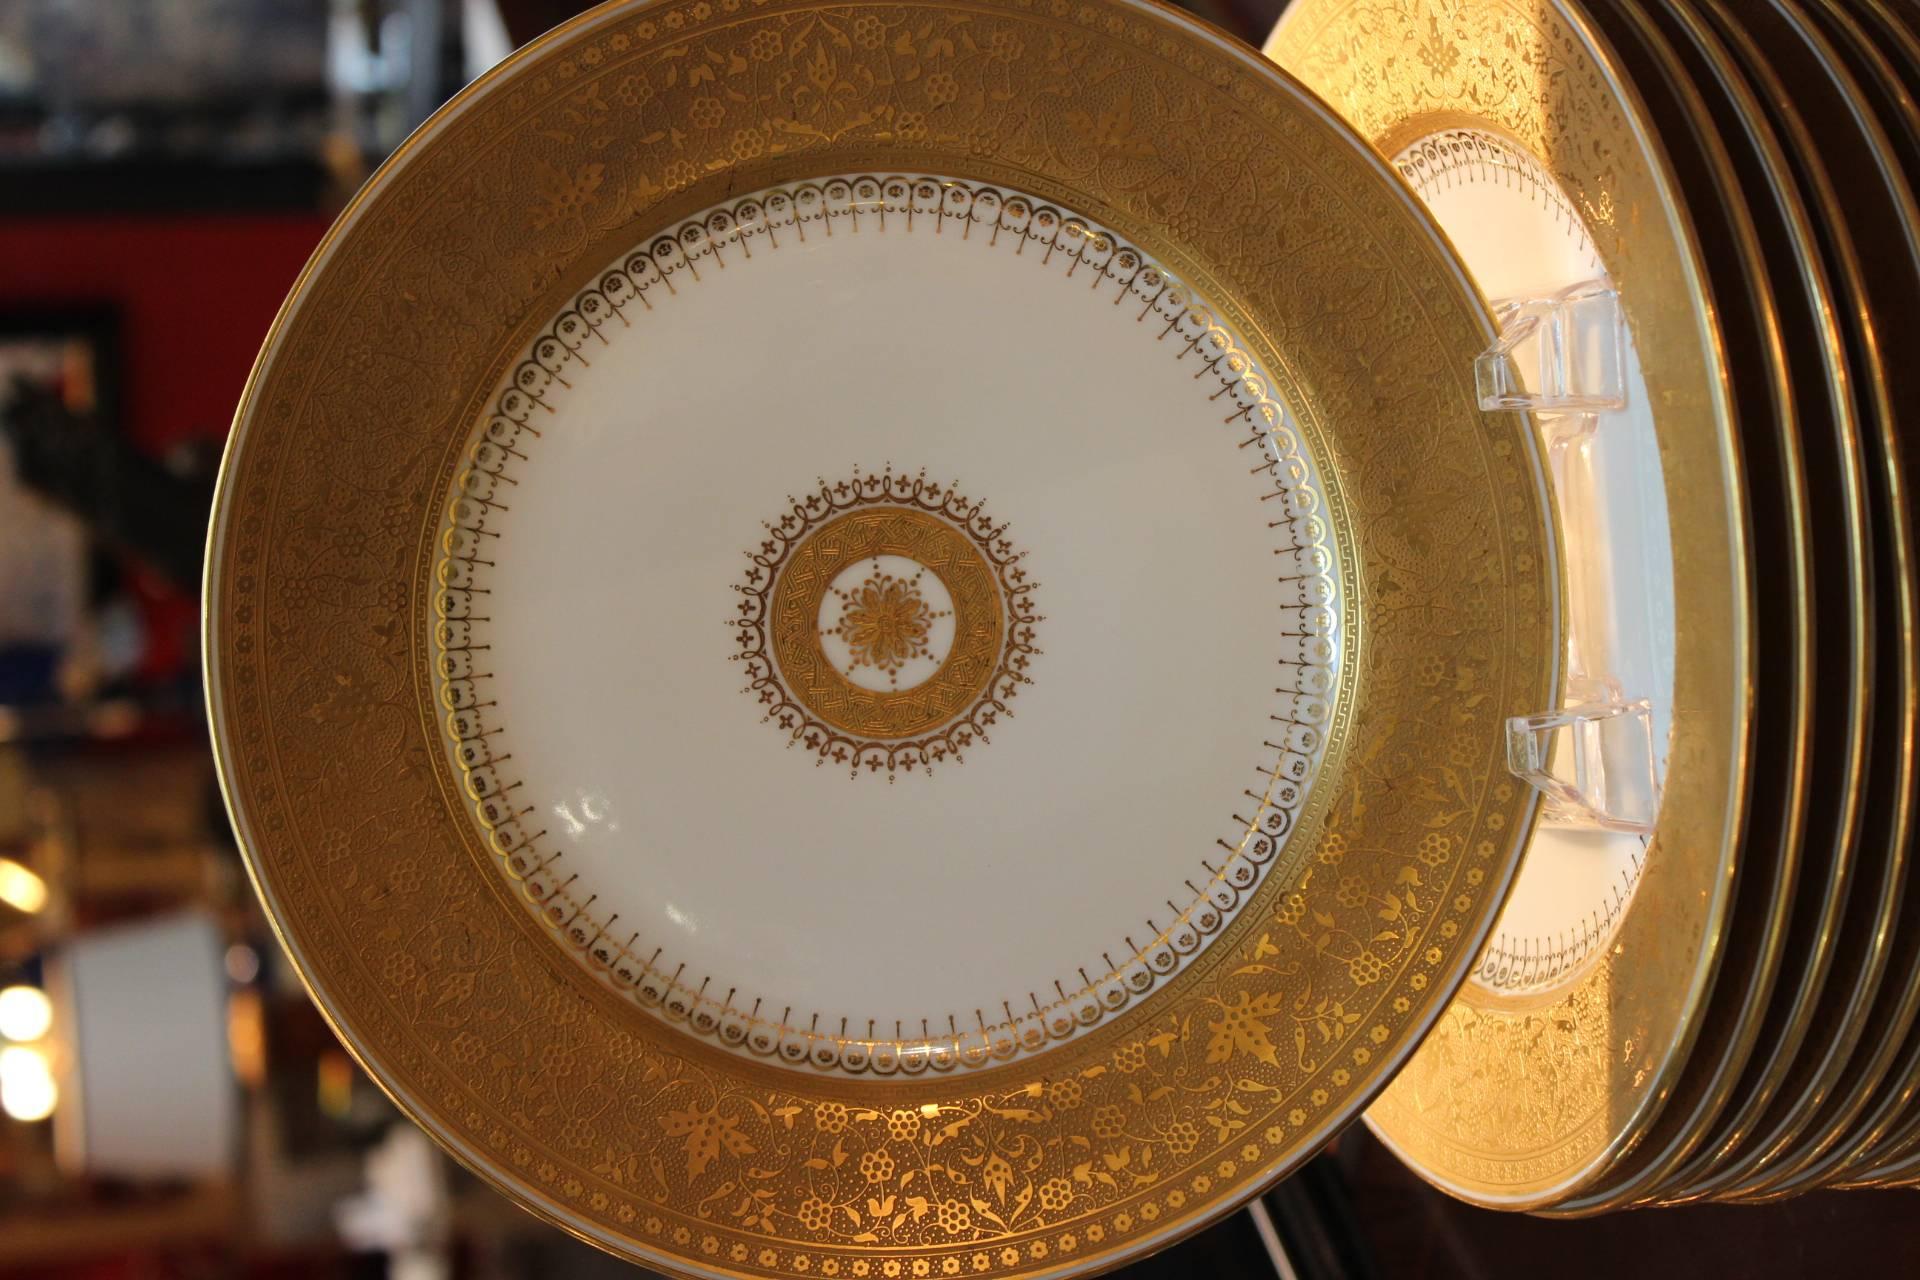 Graceful and elegant set of 12 service plates made in France. 

Signed TV Limoges France which stands for Tressemann & Vogt which was one of many factories doing business in Limoges, France at the turn of the last century.
The textured wide gold